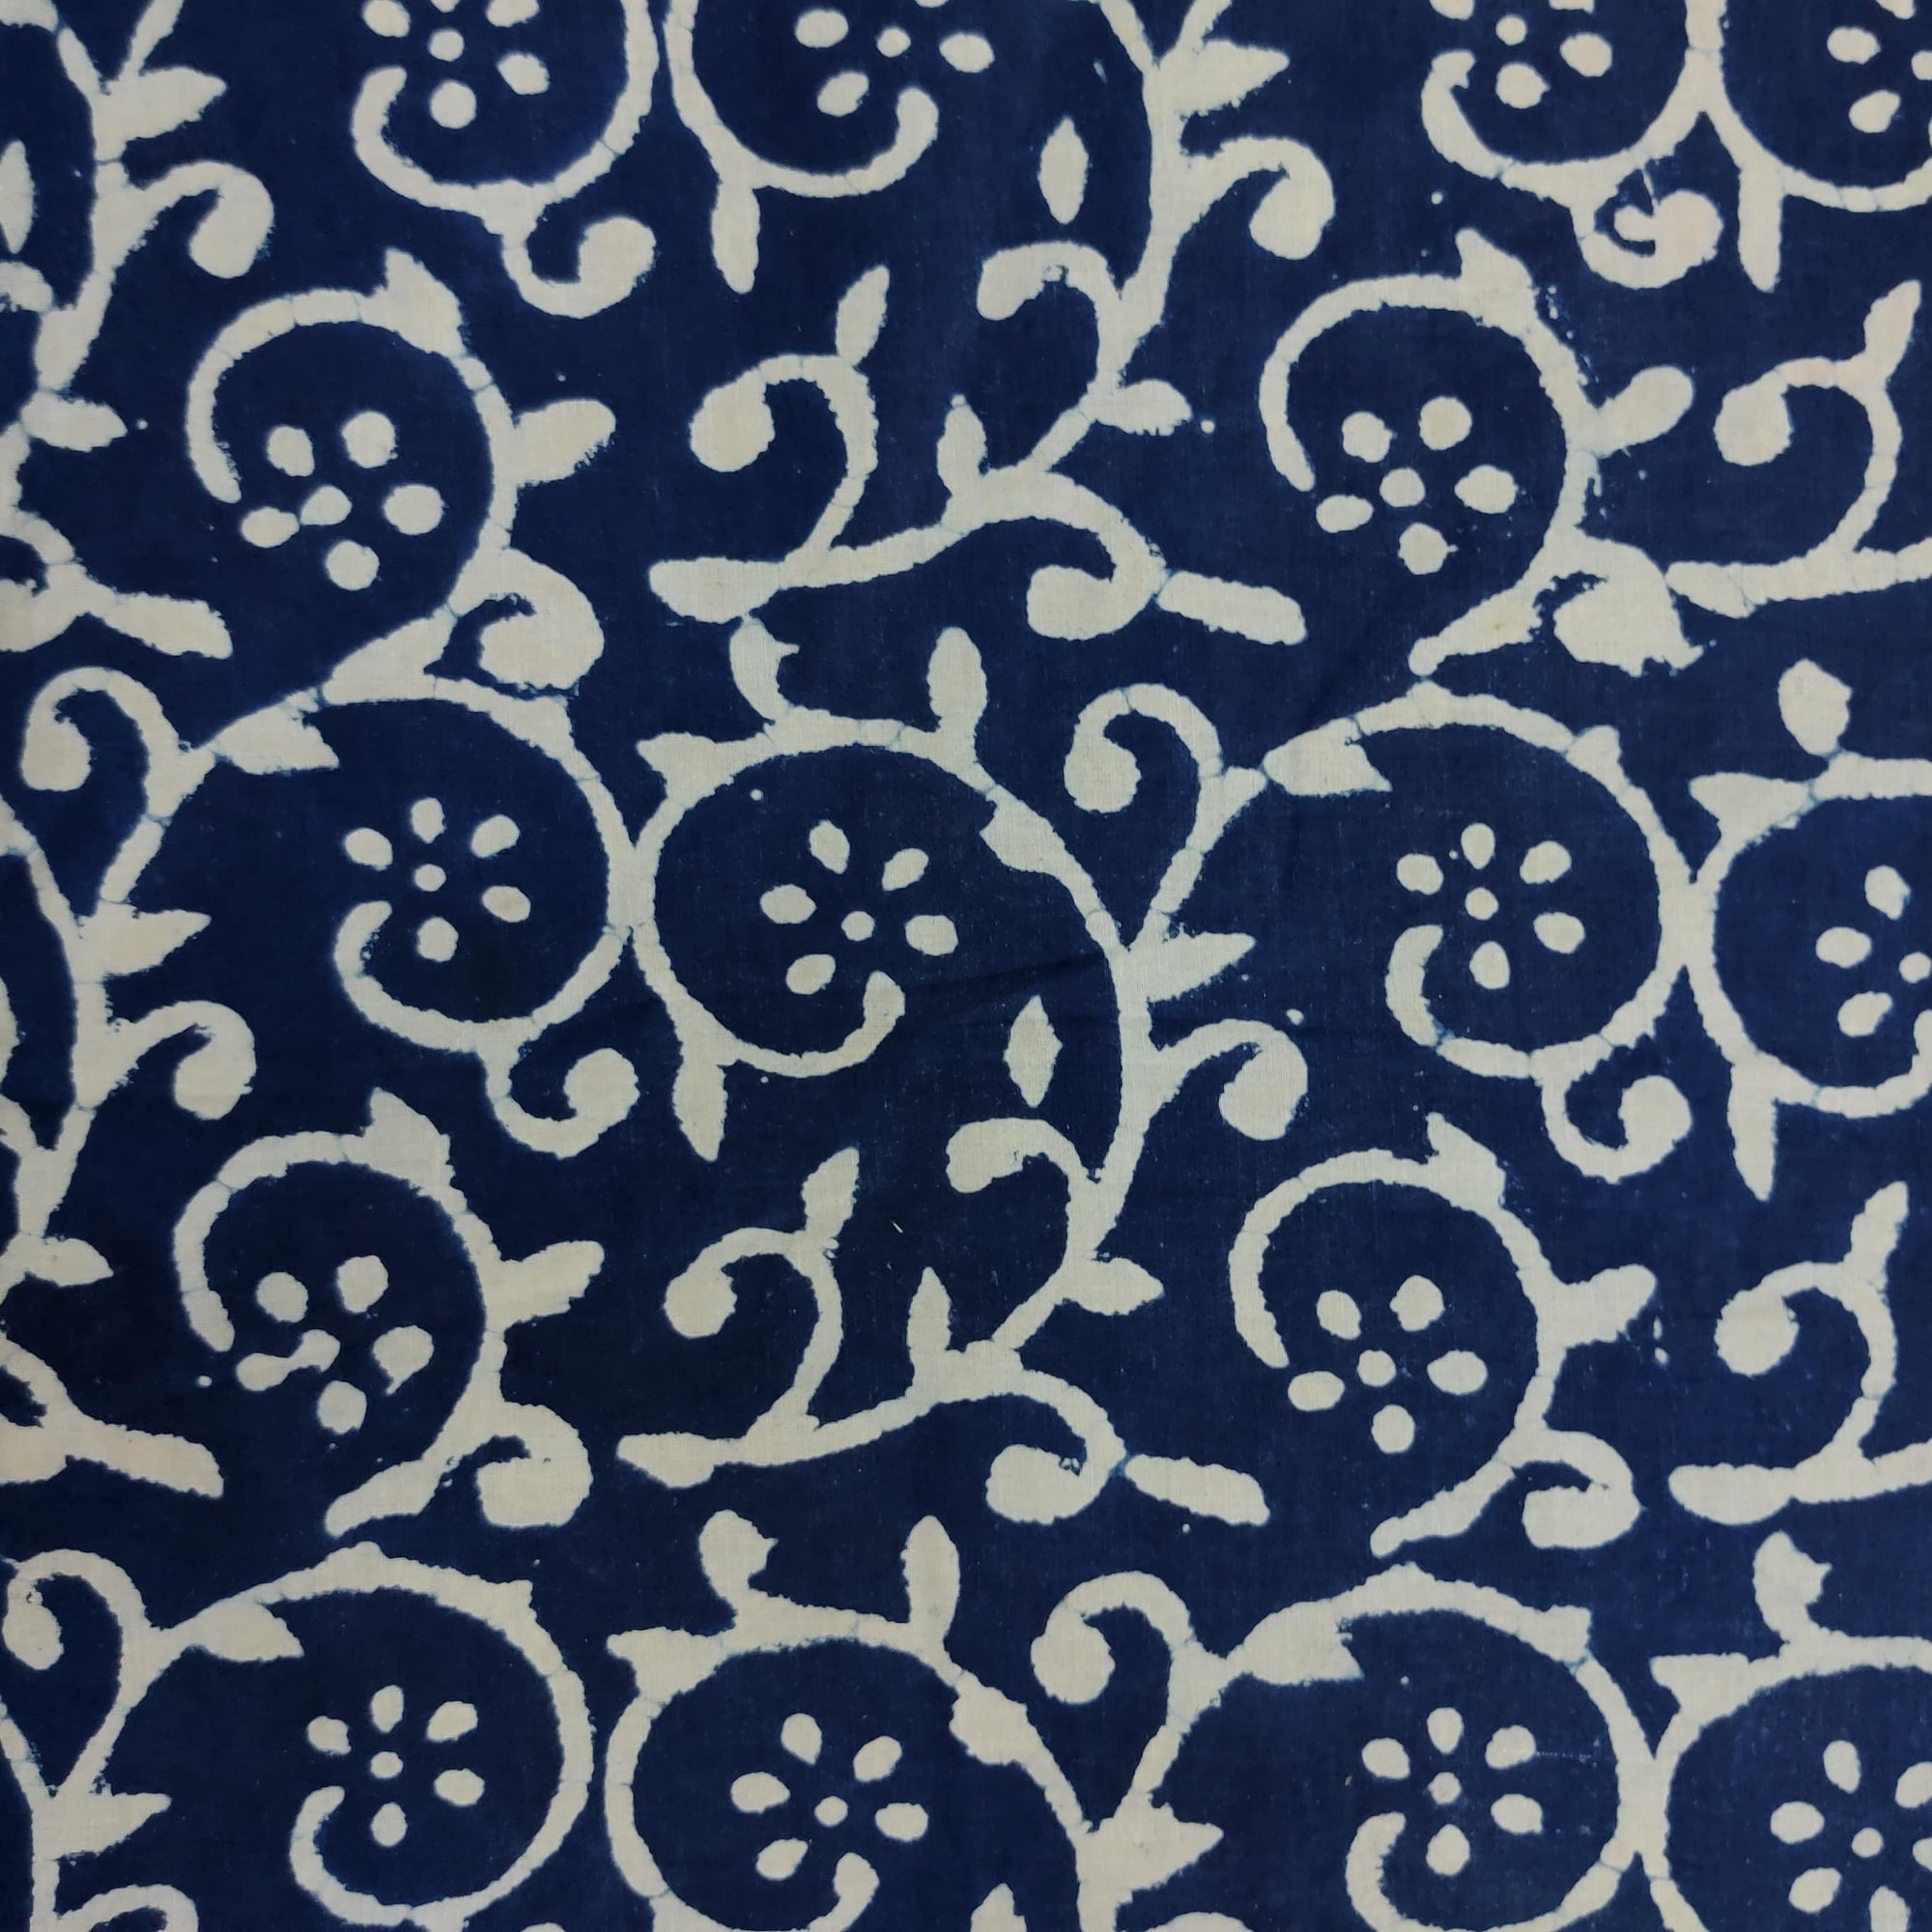 Sparkly Cheetah/Camo Printed Cotton Canvas - Indigo/Taupe - Fabric by the  Yard